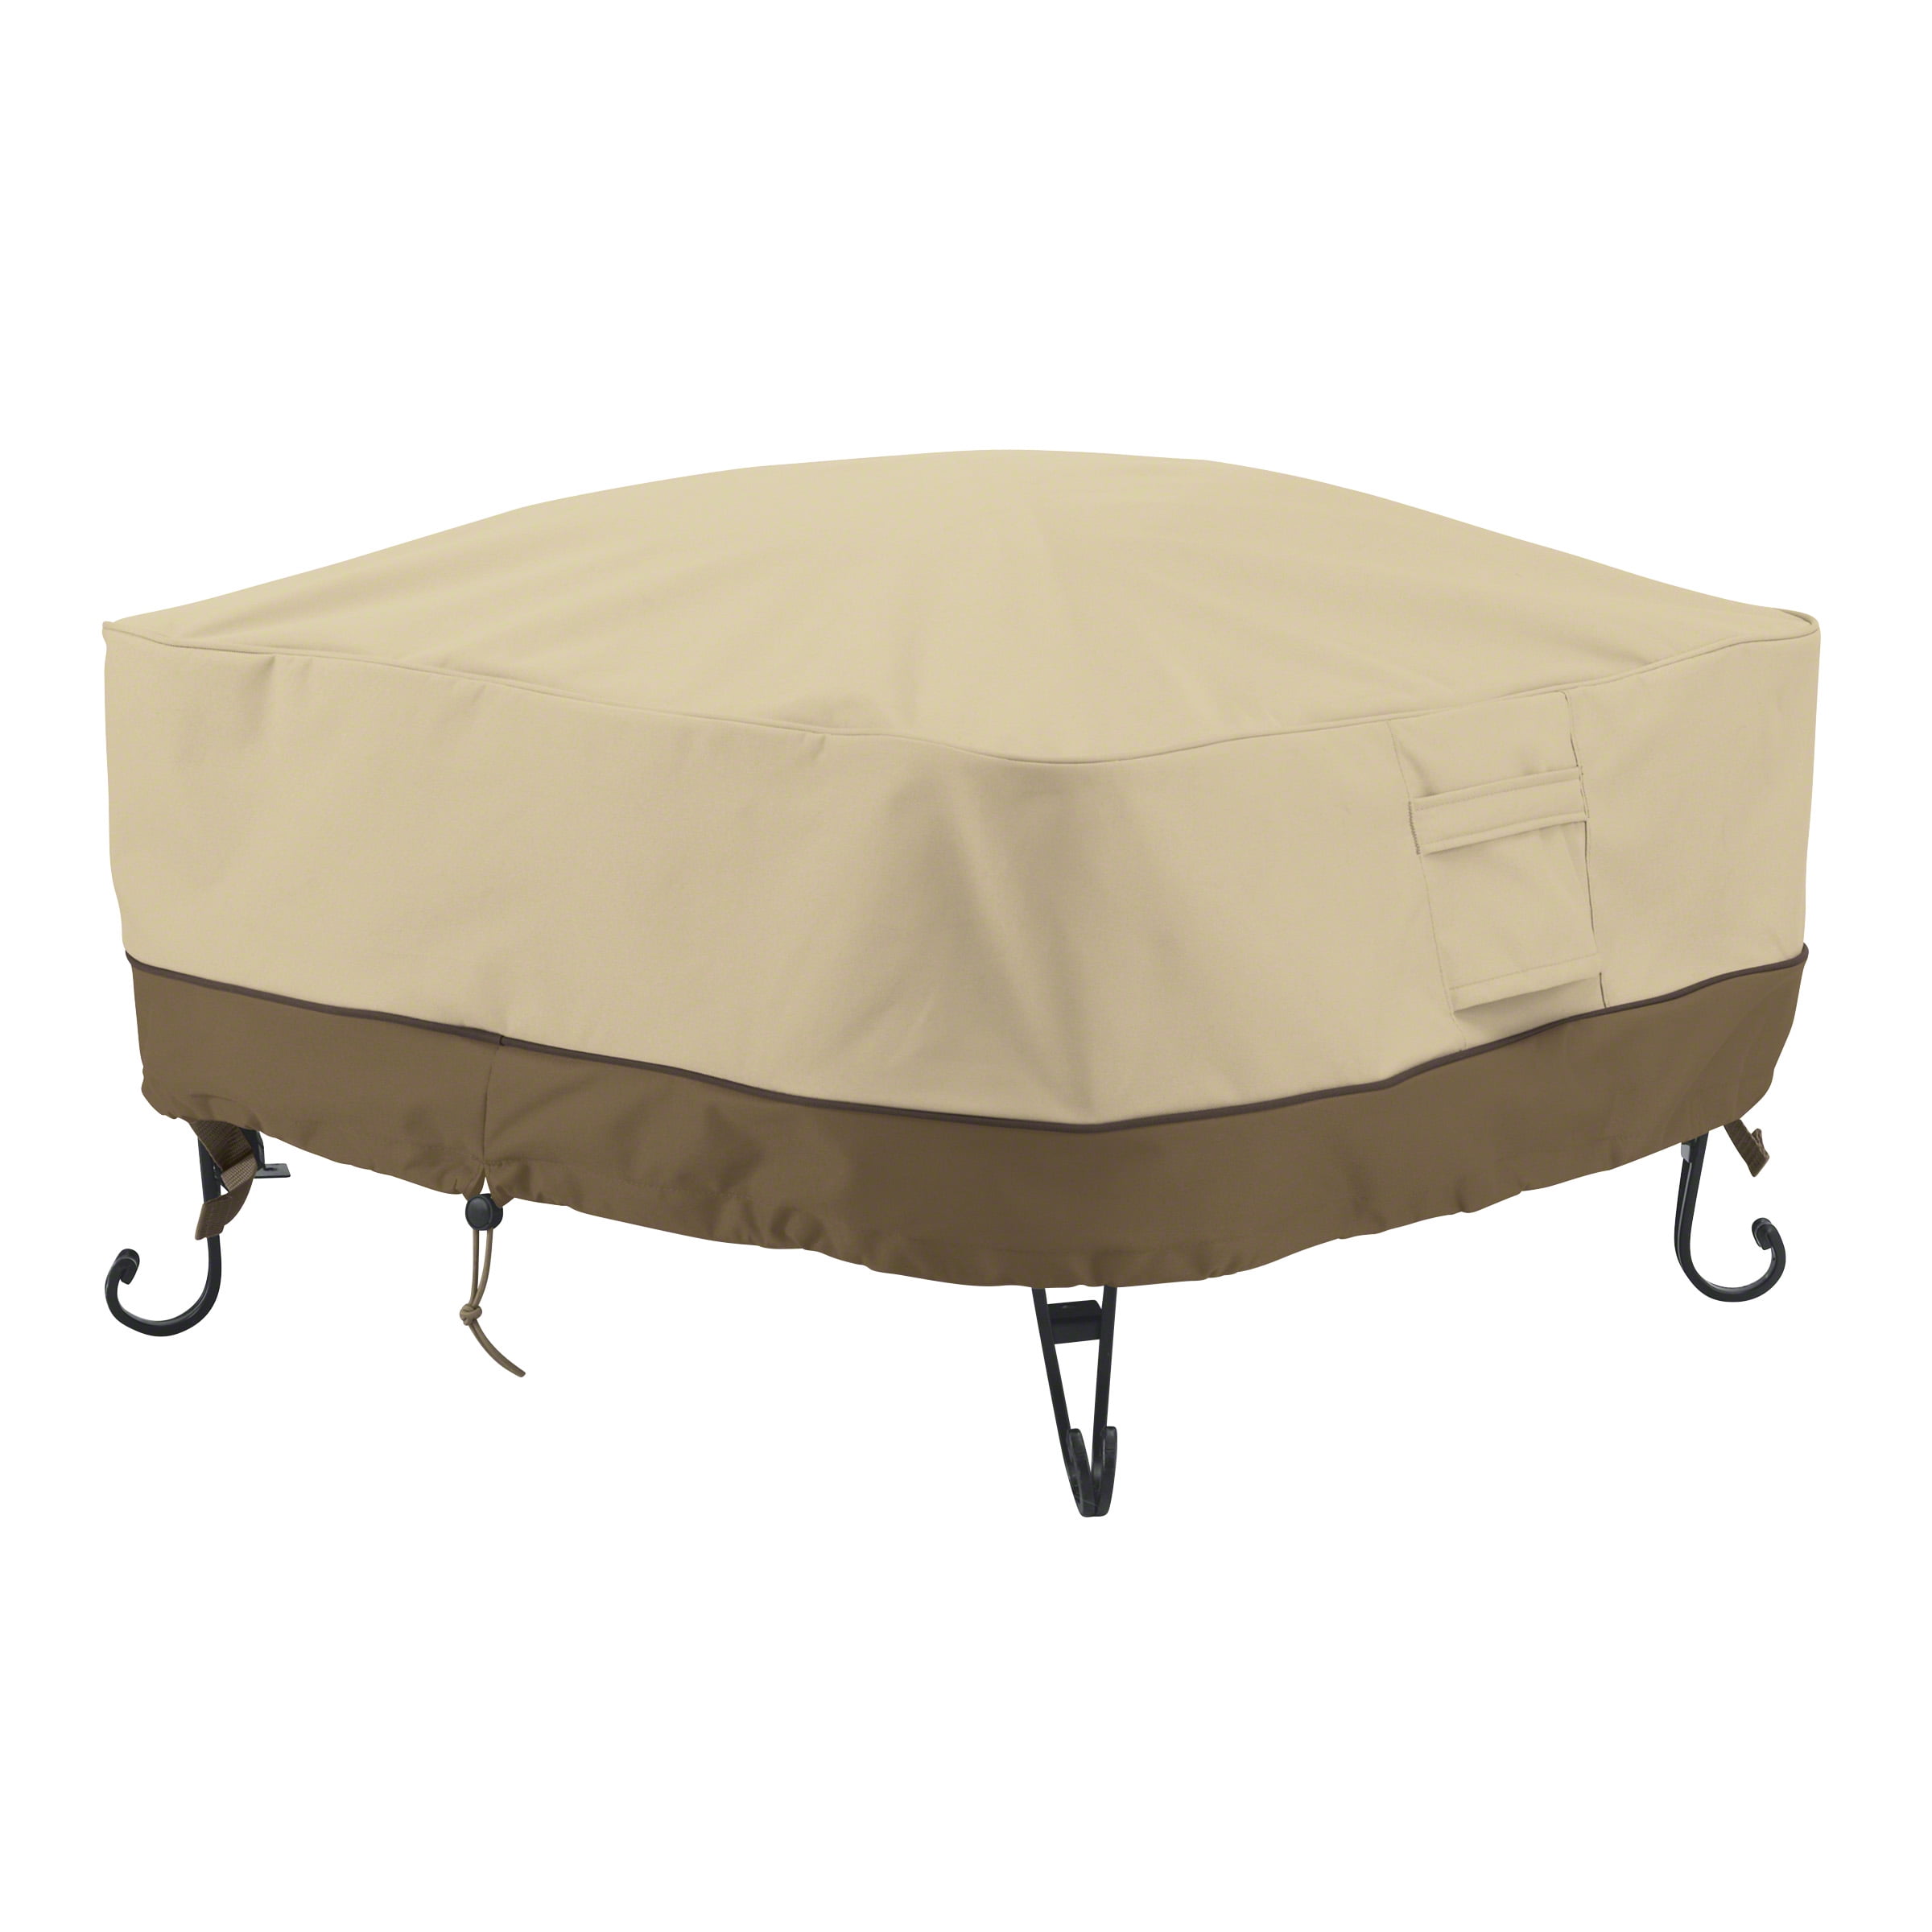 Full Coverage Square Fire Pit Cover, 30 Inch Round Fire Pit Cover